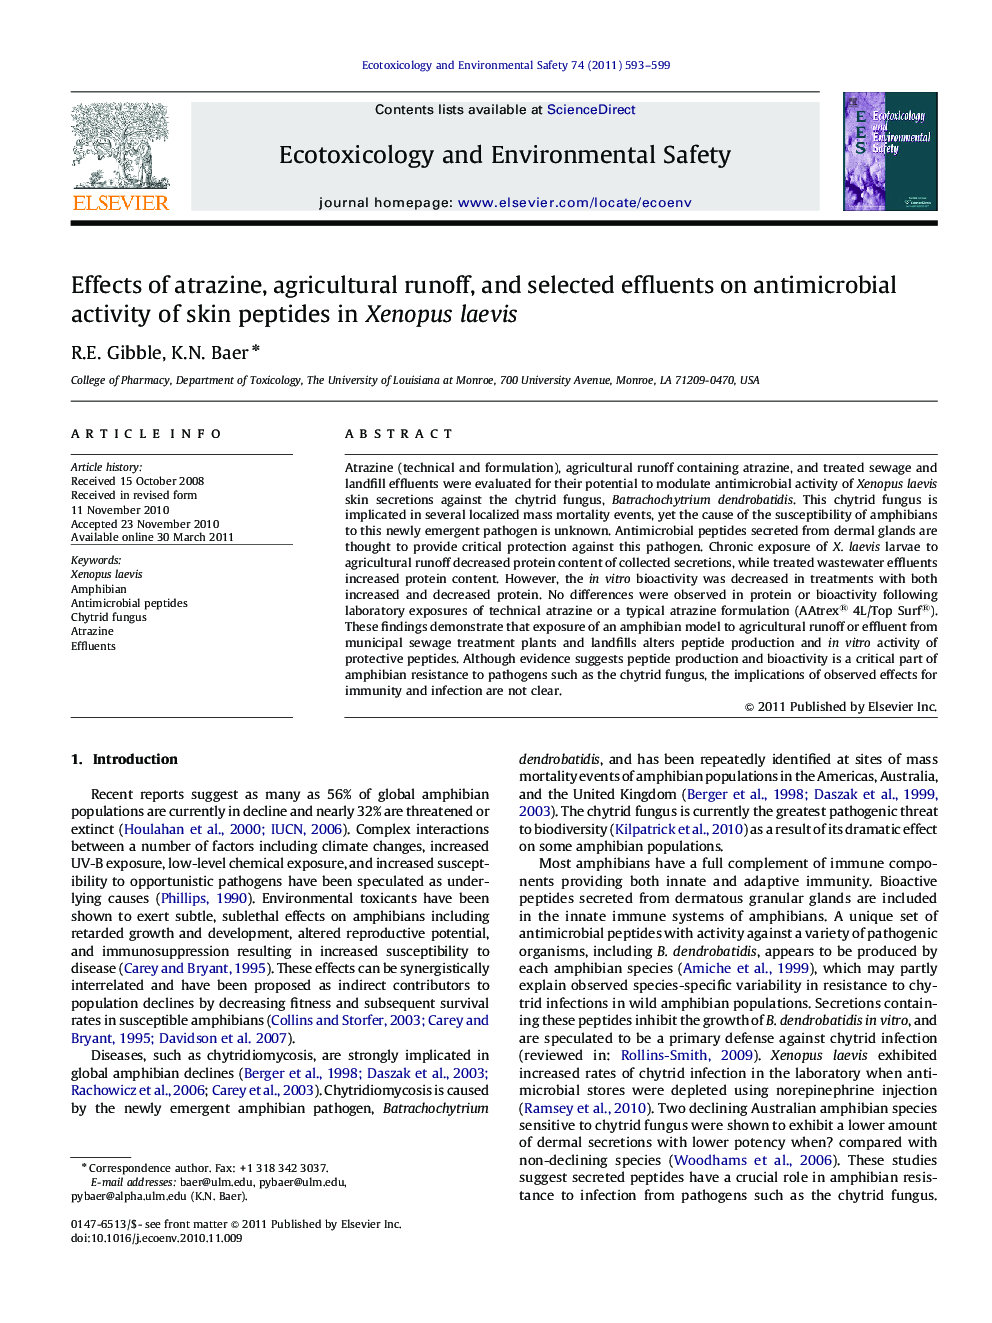 Effects of atrazine, agricultural runoff, and selected effluents on antimicrobial activity of skin peptides in Xenopus laevis